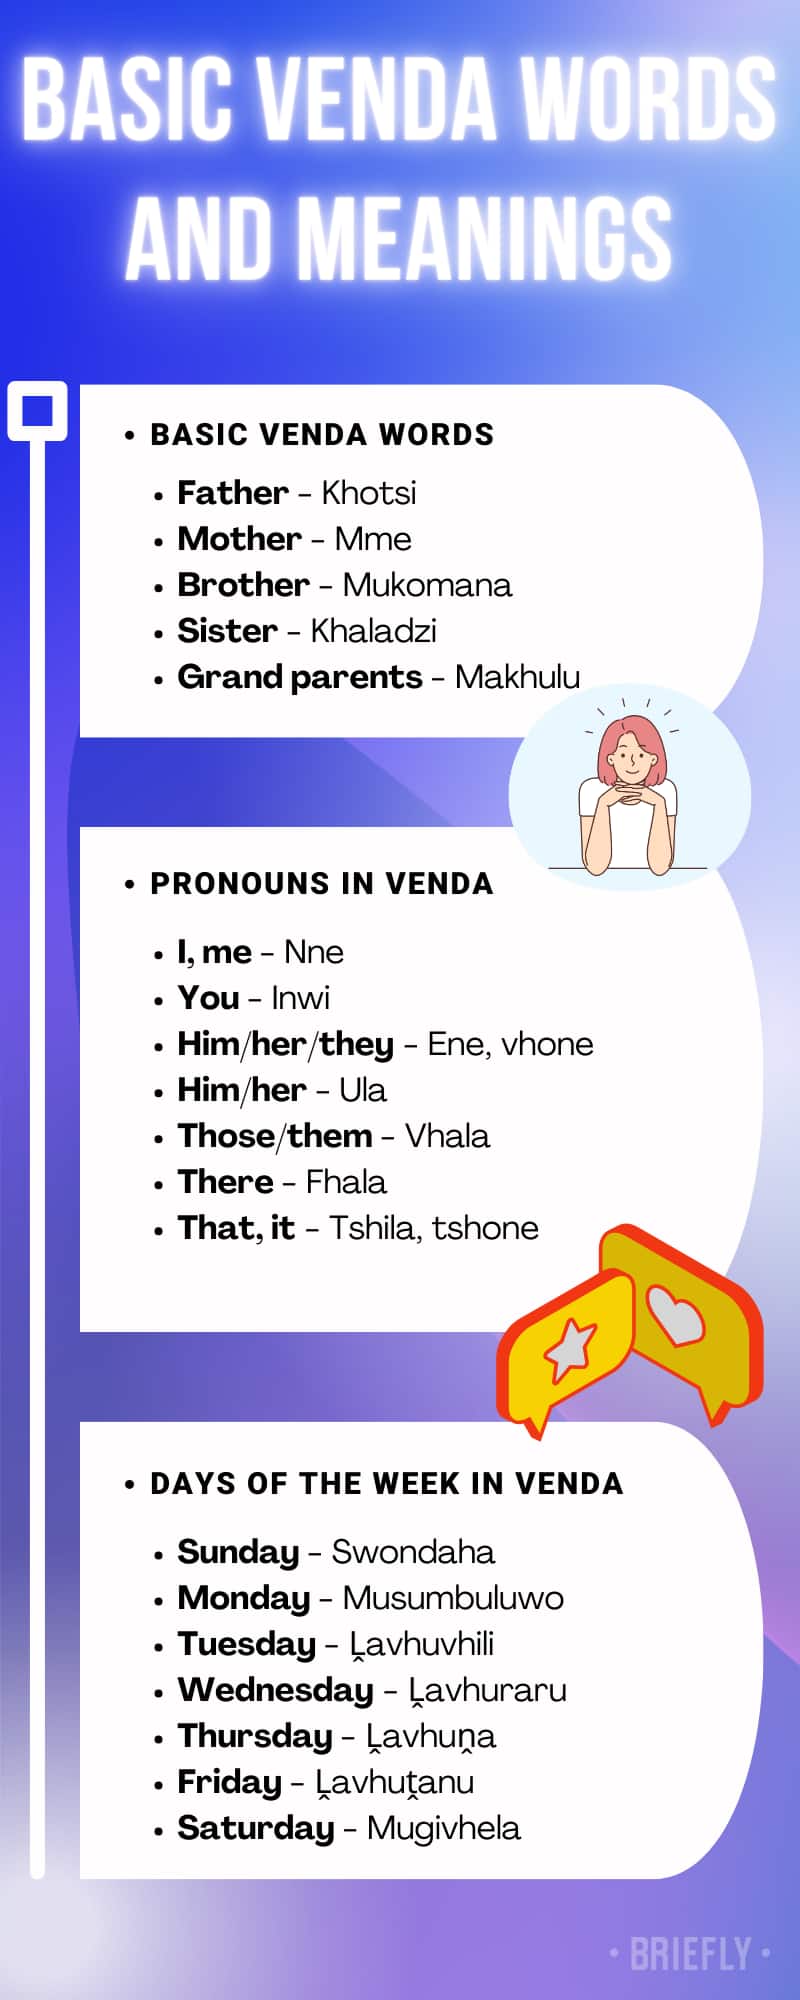 Basic Venda words and meanings that you ought to know